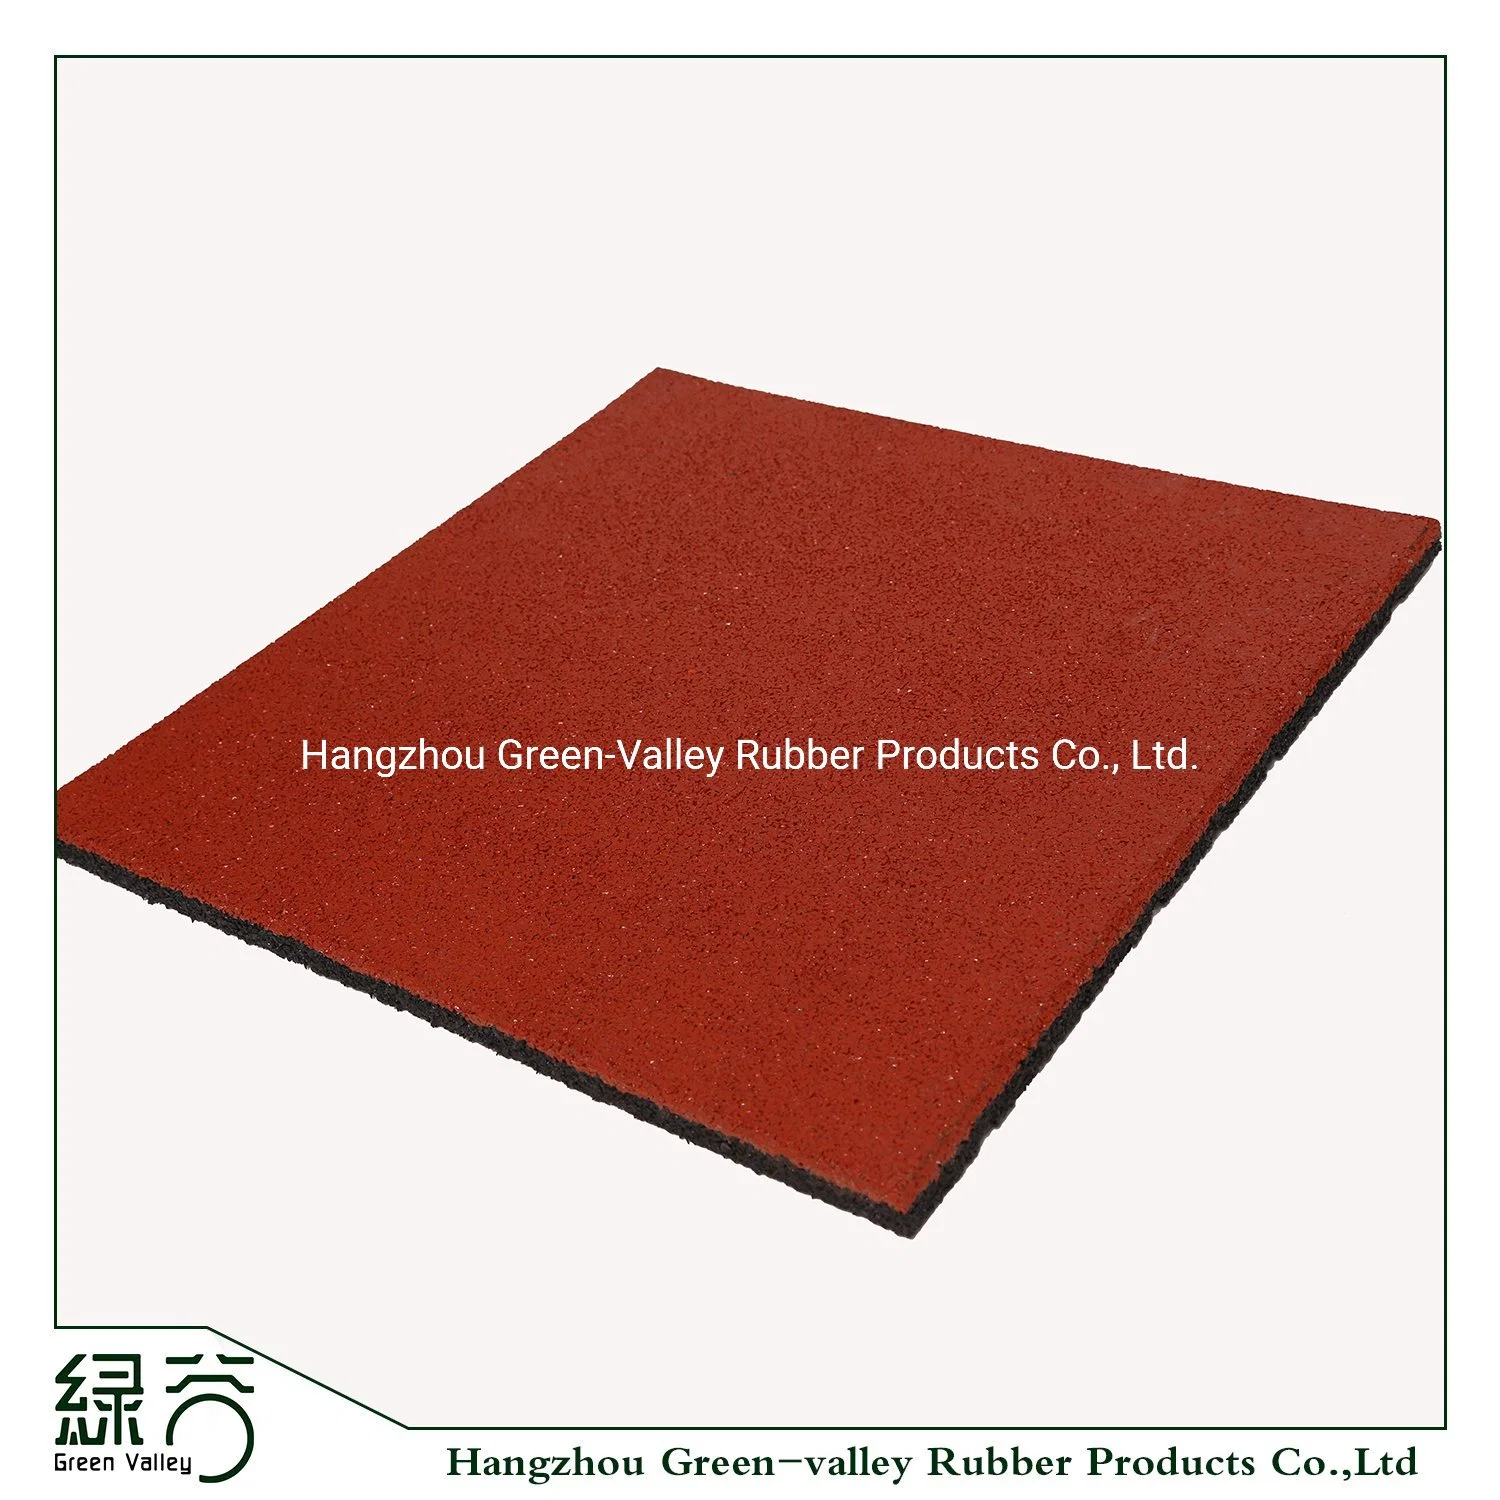 500 X 500 Rubber Paver Tile with High Quality for Outdoor